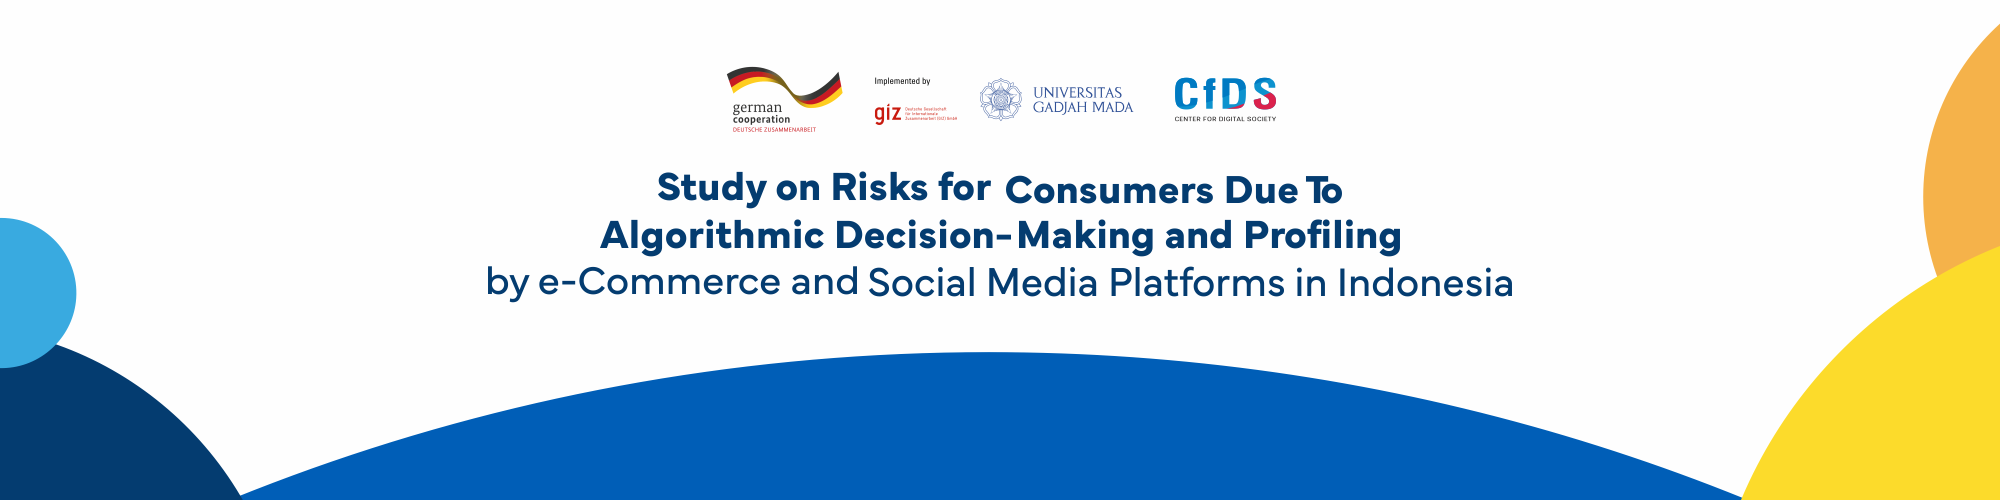 Study on Risk for Consumers Due To Algorithmic Decision Making and Profiling by e-Commerce and Social Media Platforms in Indonesia